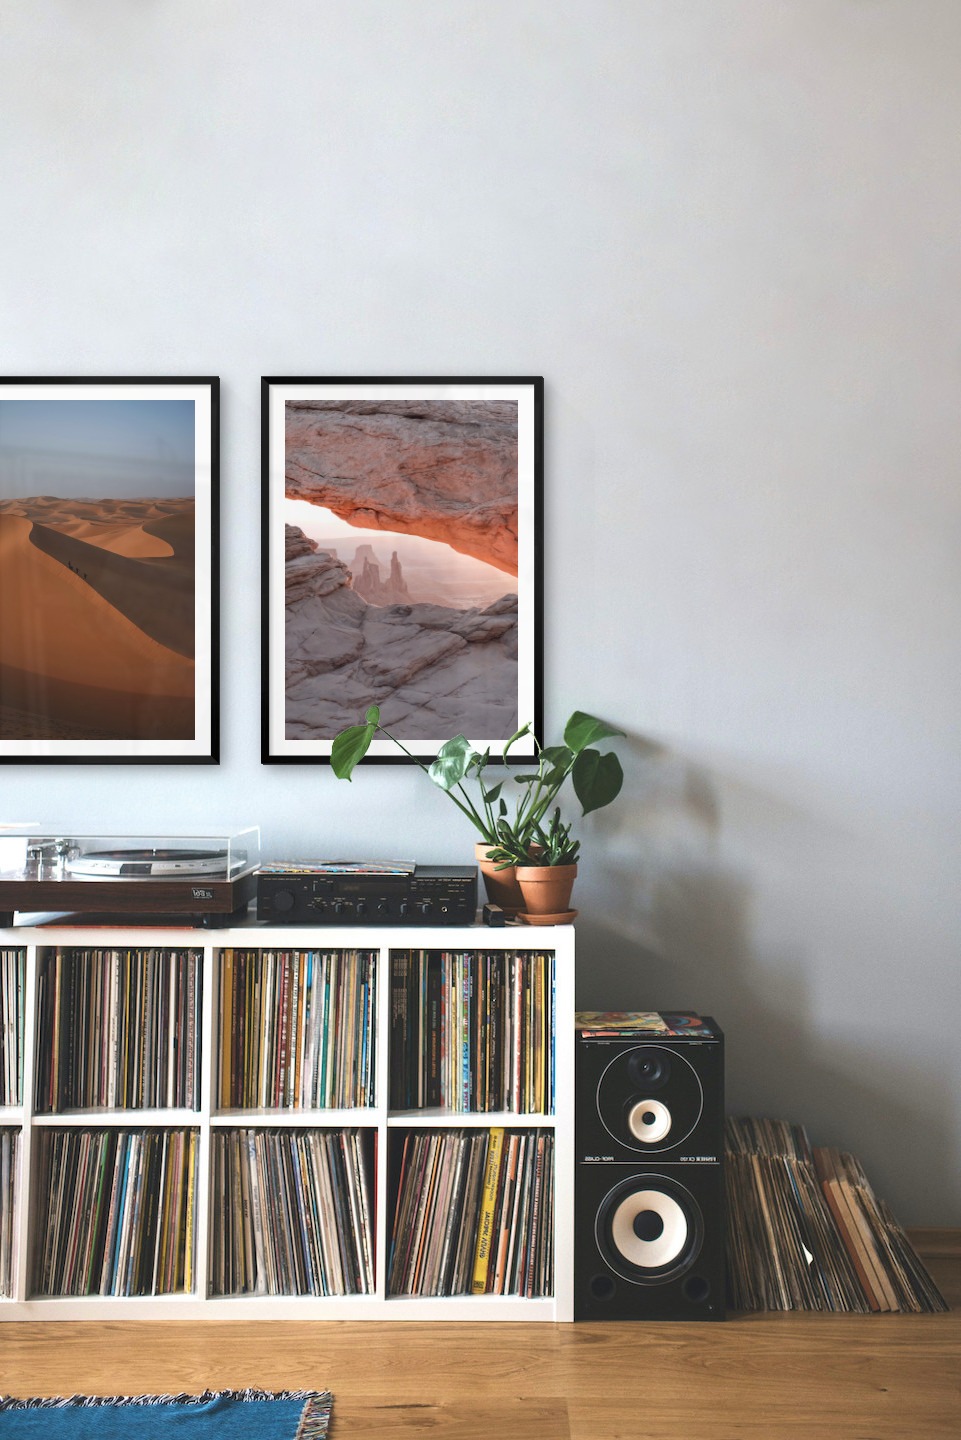 Gallery wall with picture frames in black in sizes 50x70 with prints "Desert" and "View between cliffs"